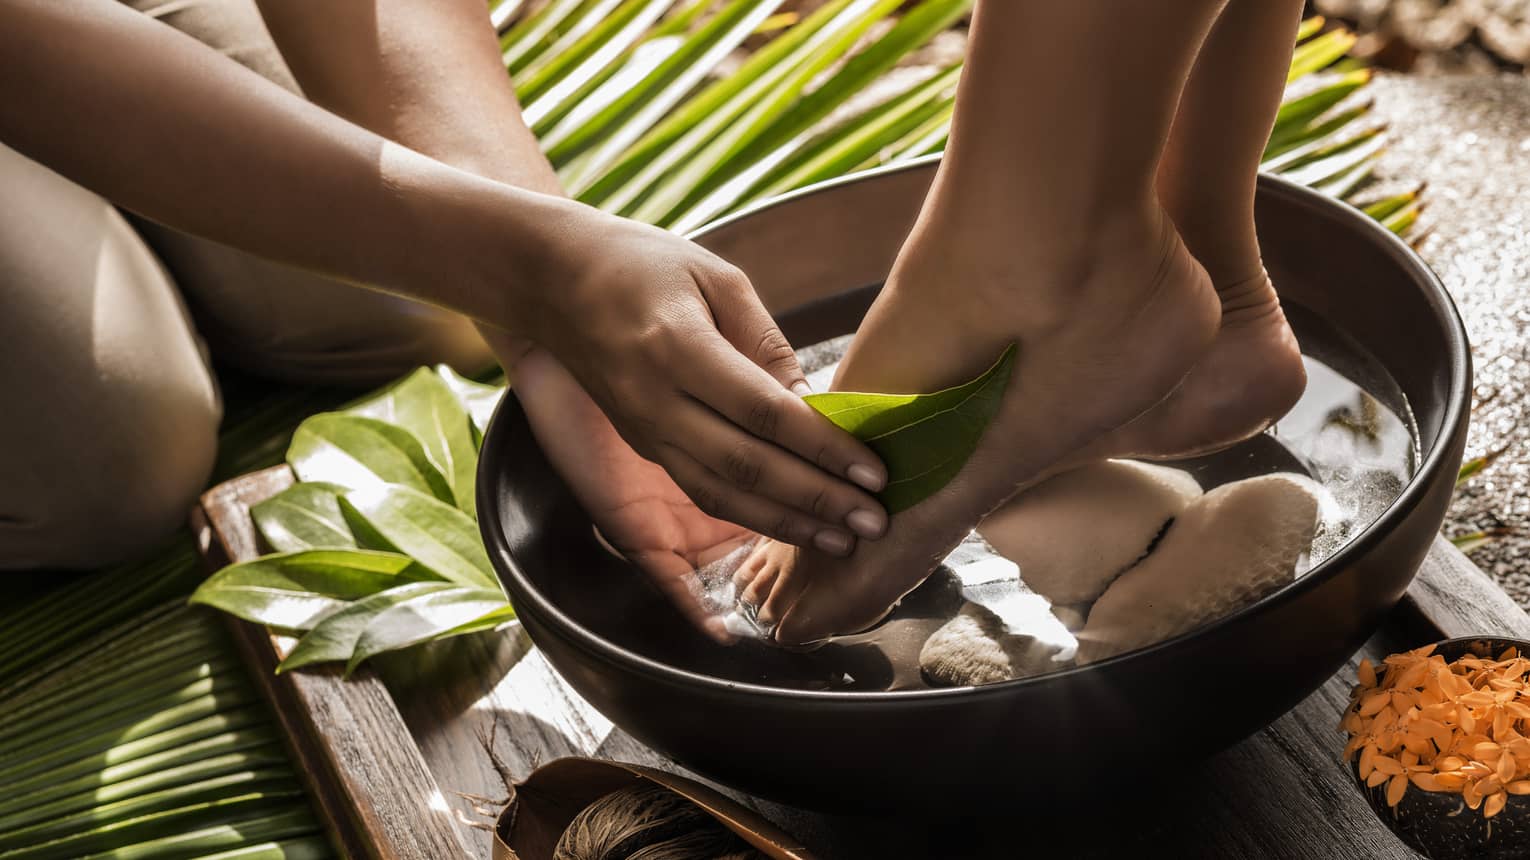 Close-up of woman's feet in round wood bowl as hands run tropical leaf over foot